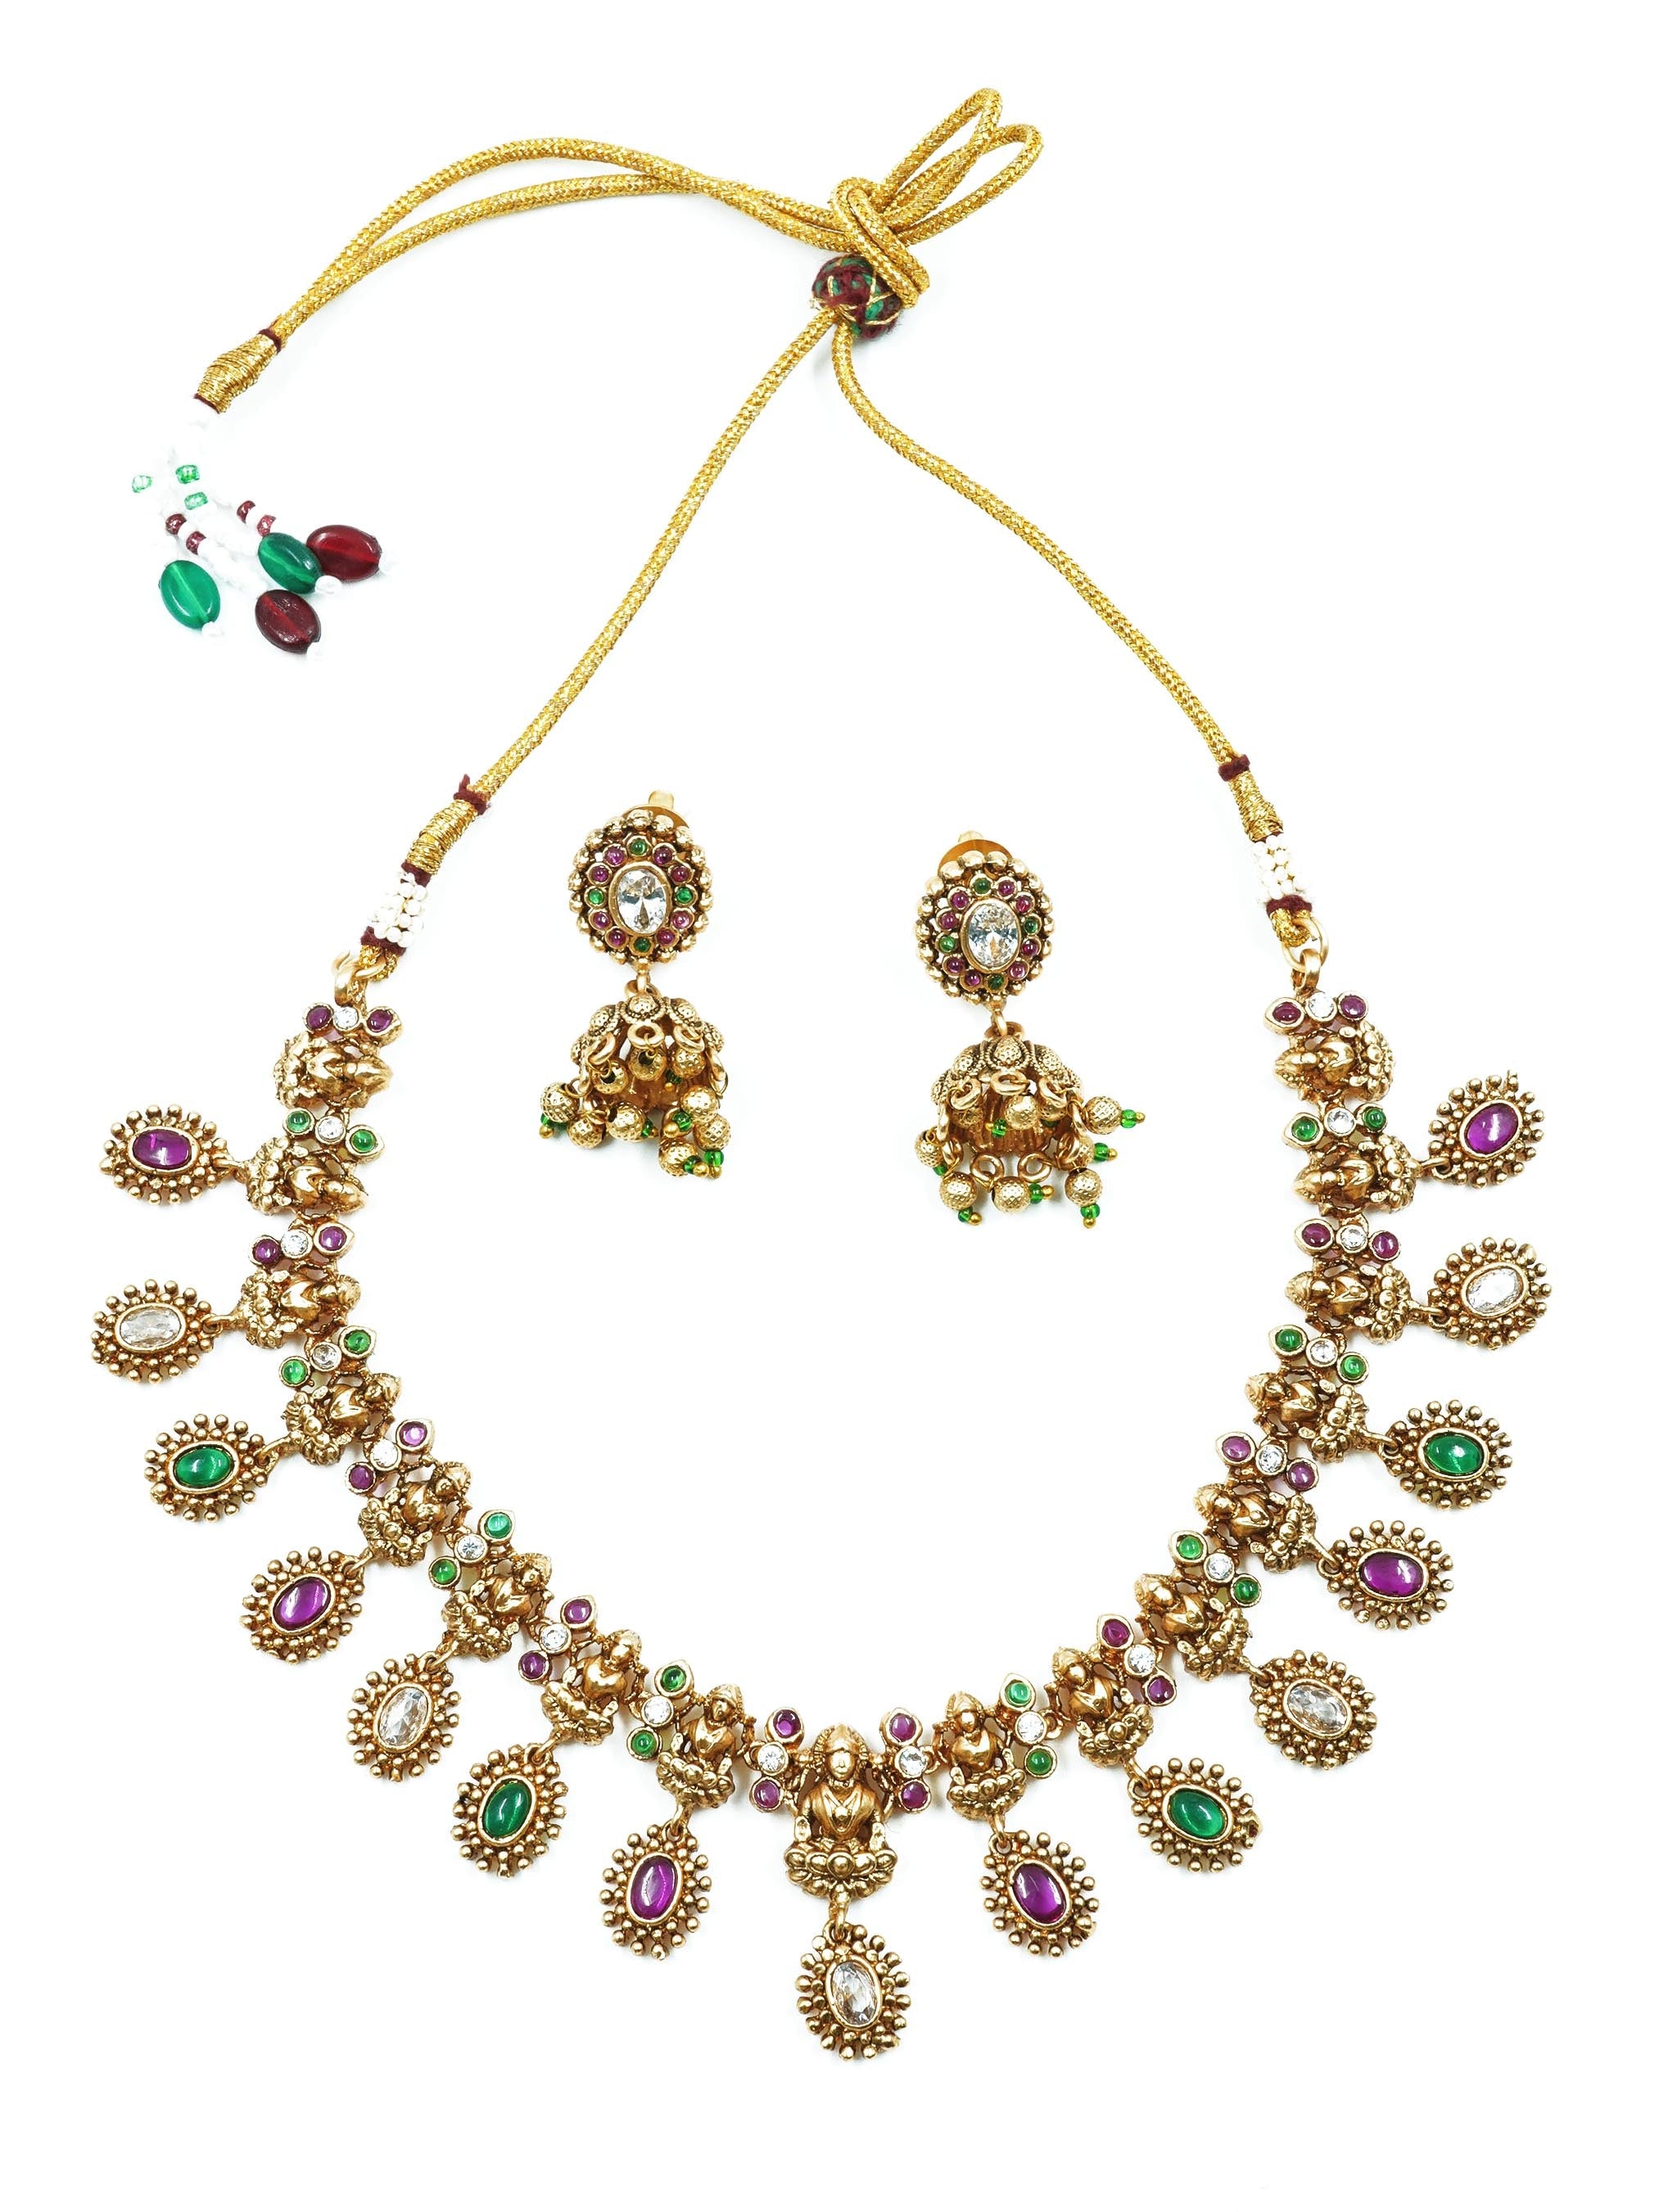 Premium gold finish Cute Short Necklace Set with Multi color AD Stones 16856N